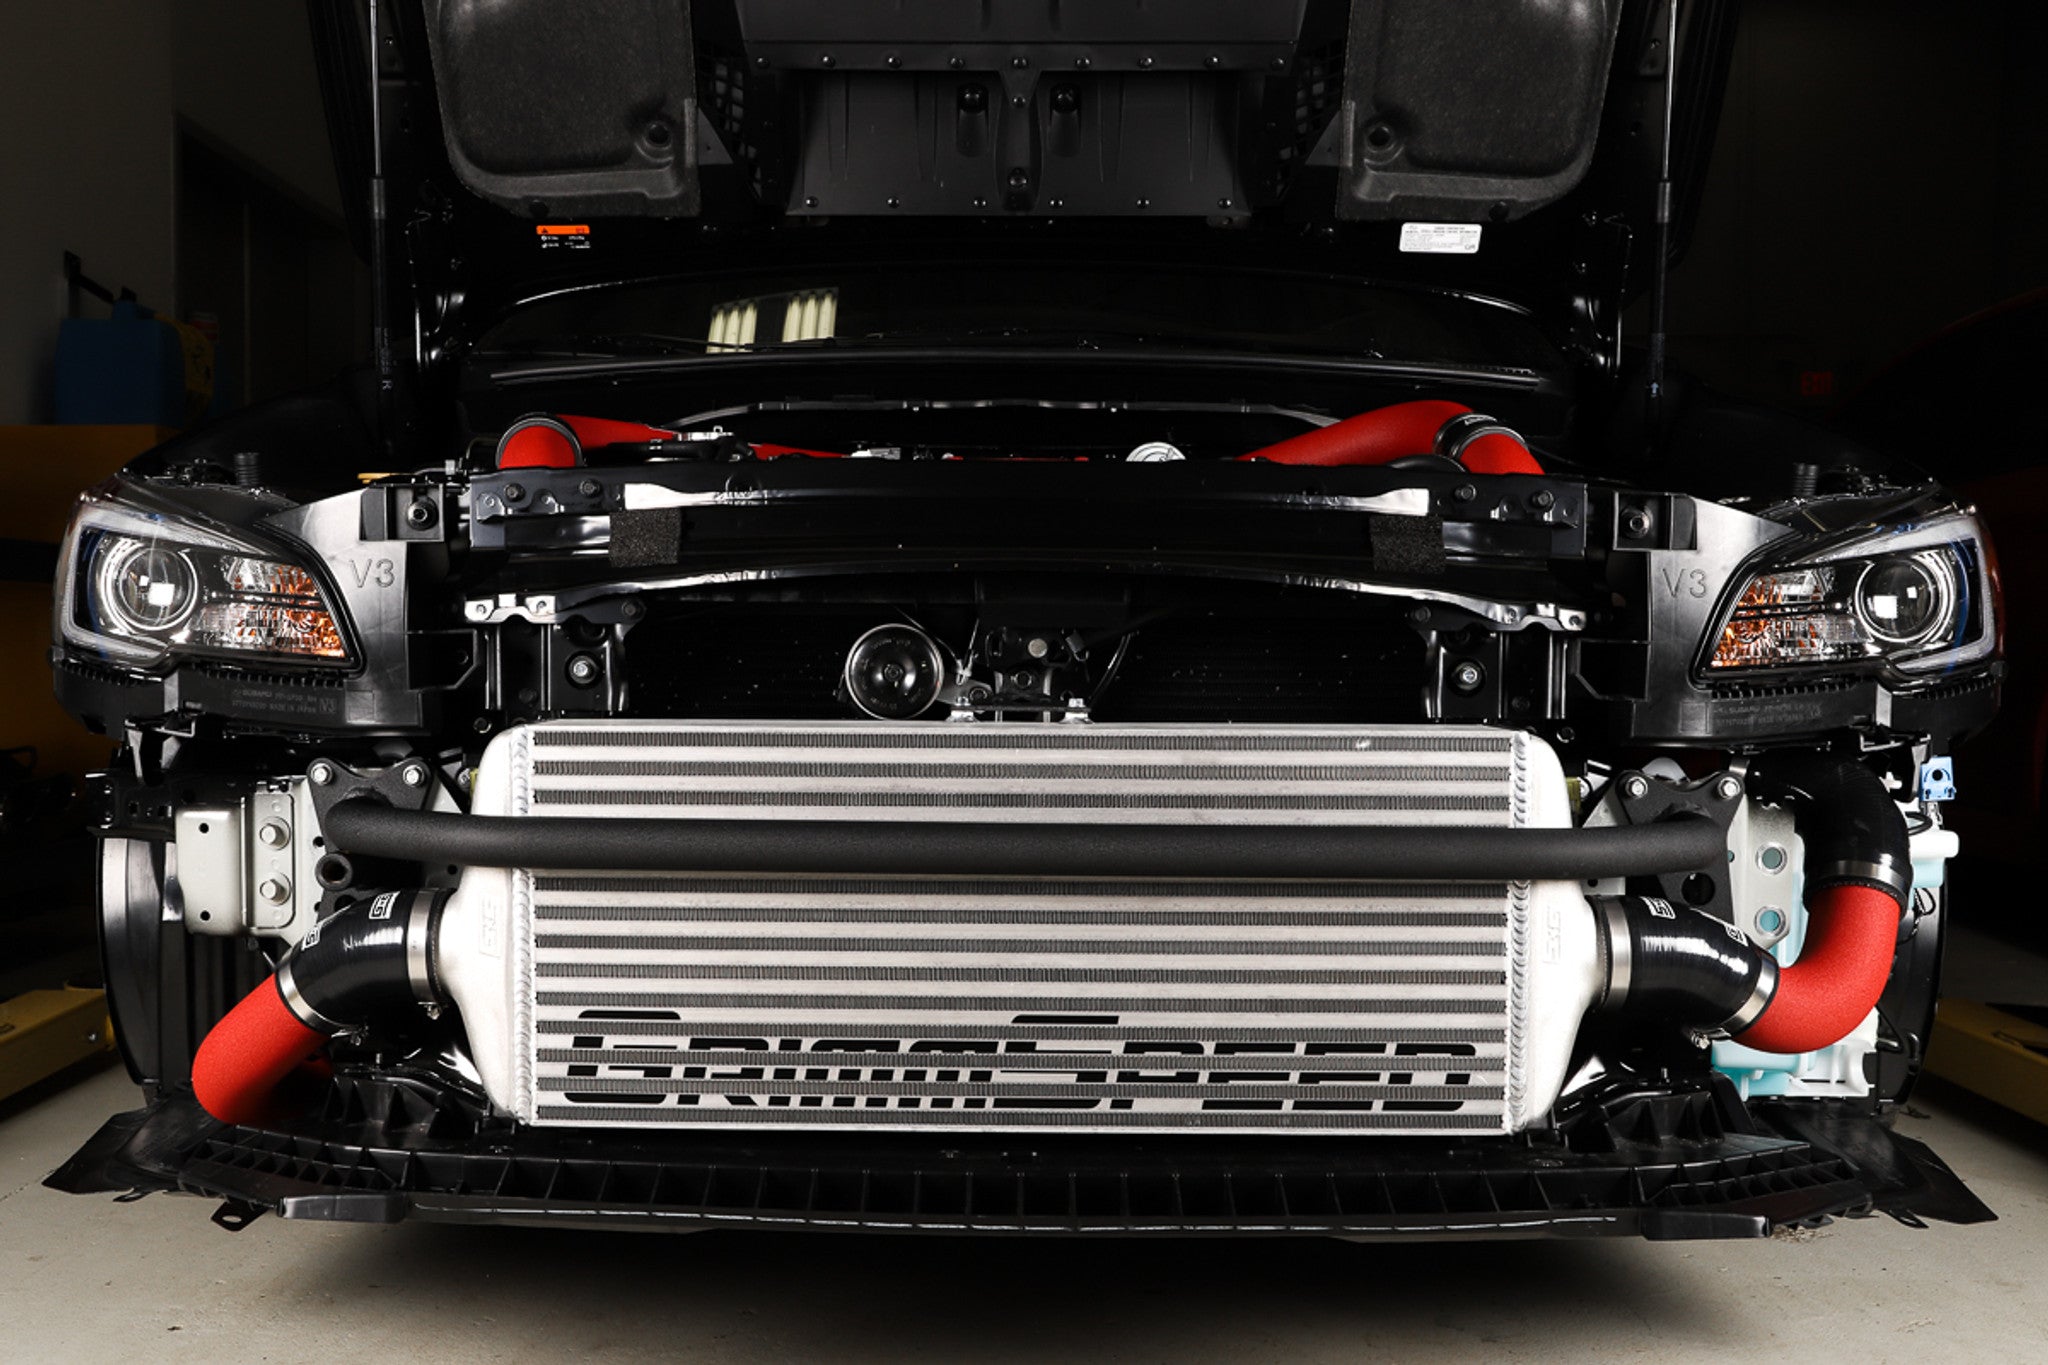 GrimmSpeed Front Mount Intercoolers: Giving the people what they want!